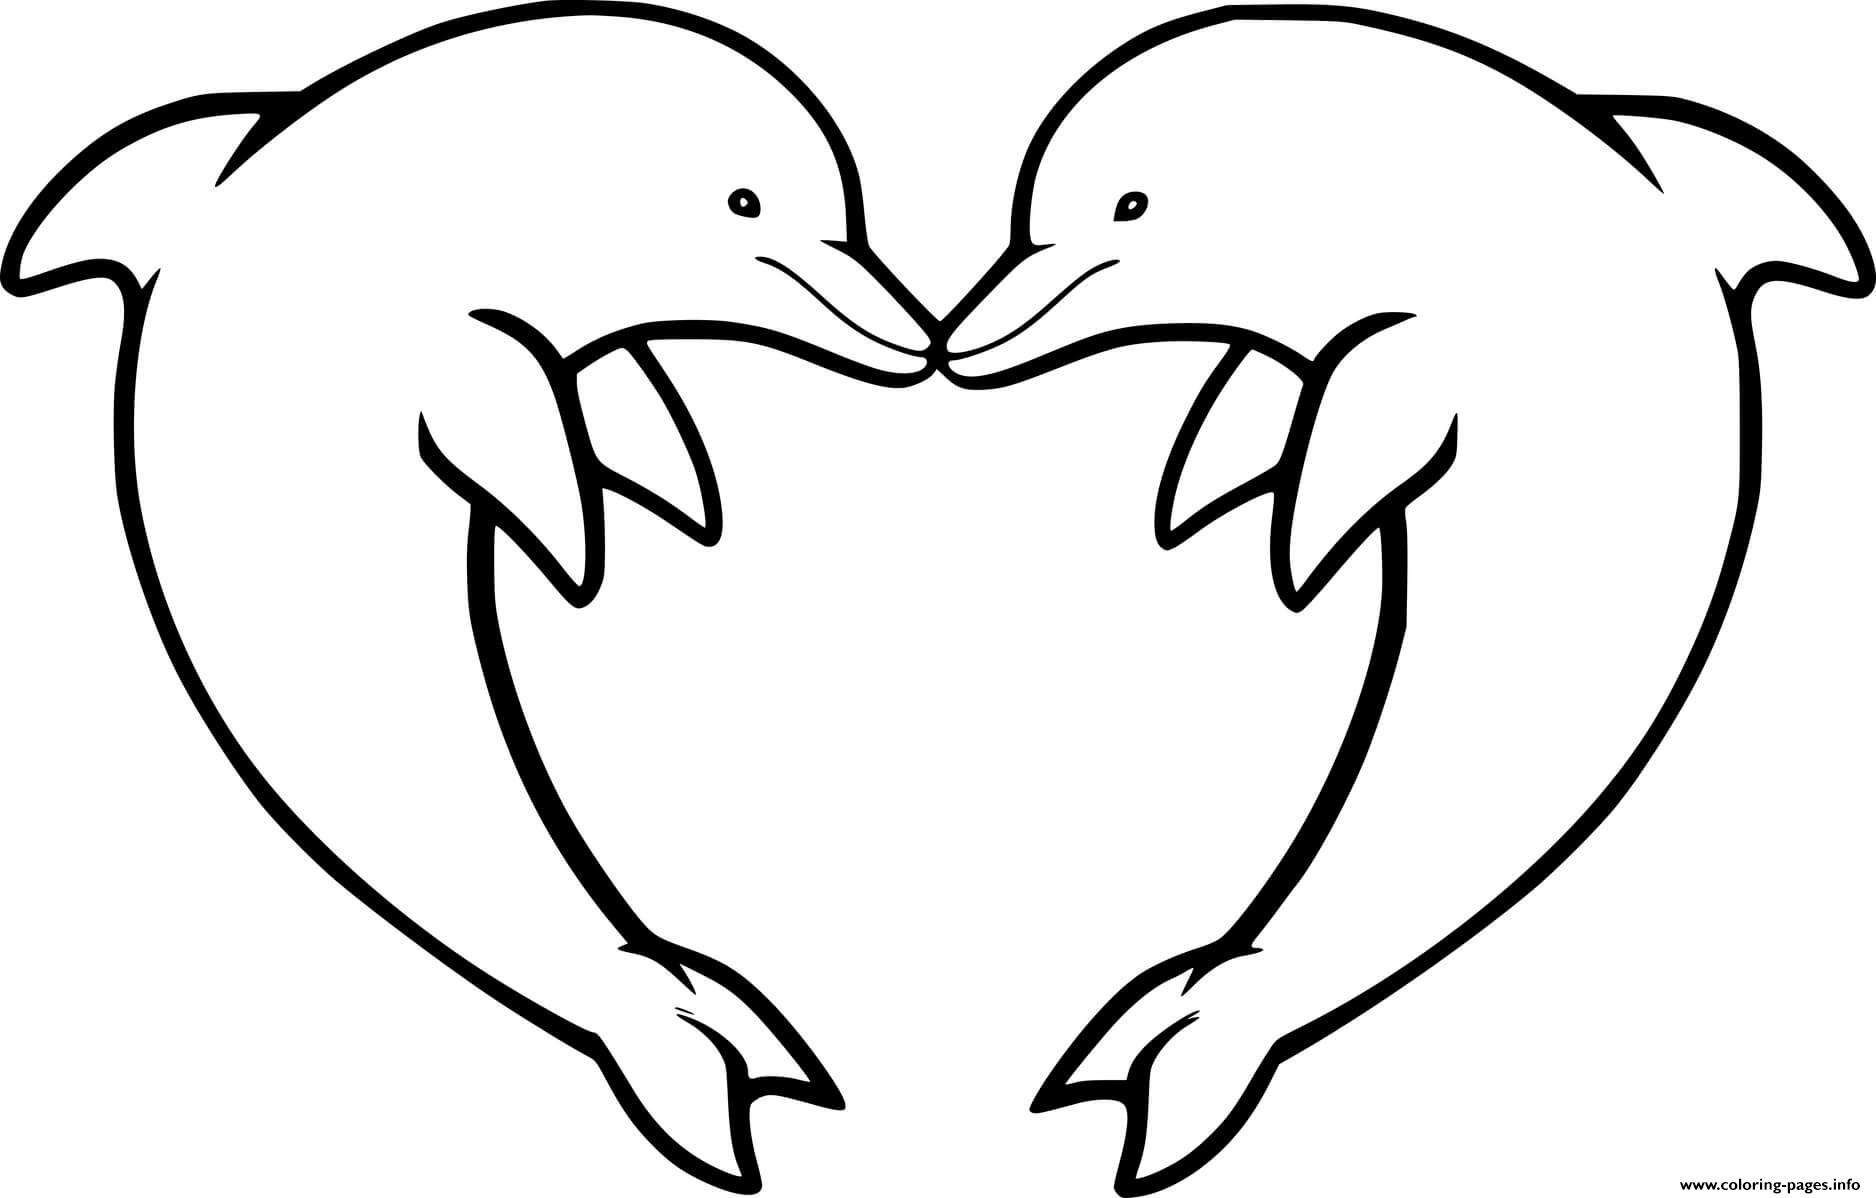 Two Dolphins Shaped A Heart Coloring page Printable